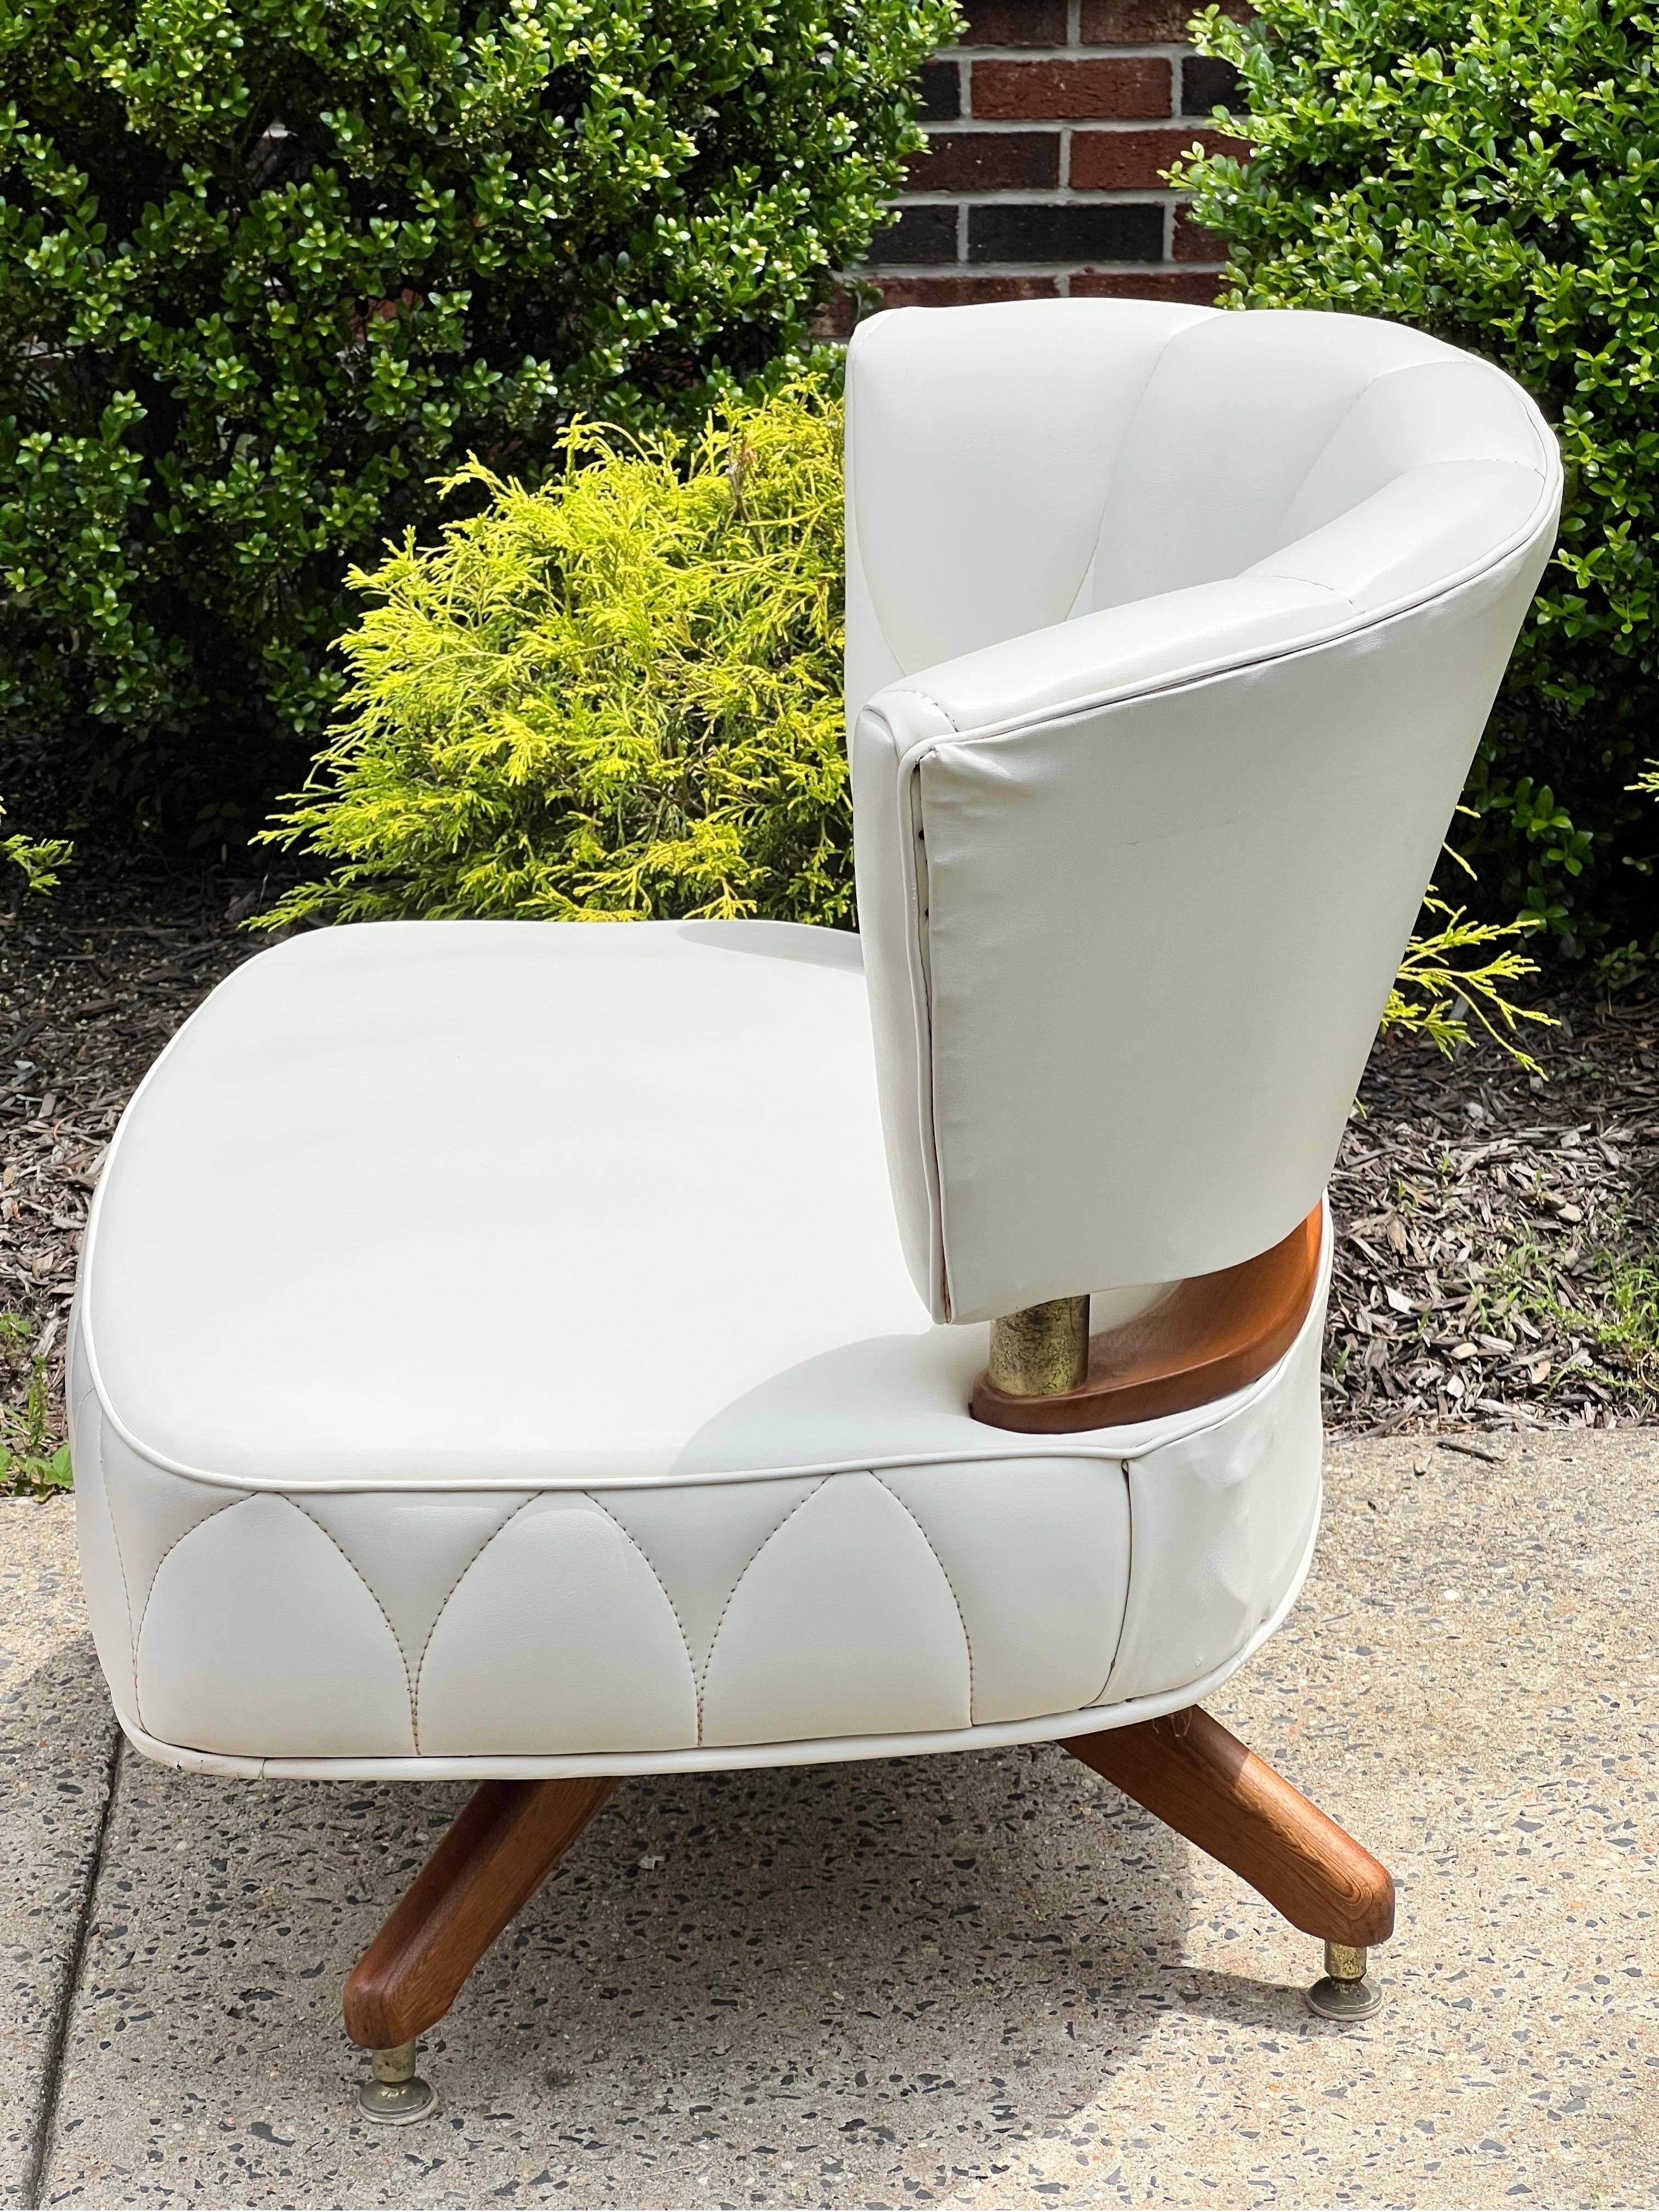 Fabulous vintage swivel slipper chair by Kroehler, 1962. 

A beautiful chair upholstered in a vibrant, creamy shade of white faux leather with unique stitching pattern detail. The upholstery color has maintained its vitality and has no fading. A